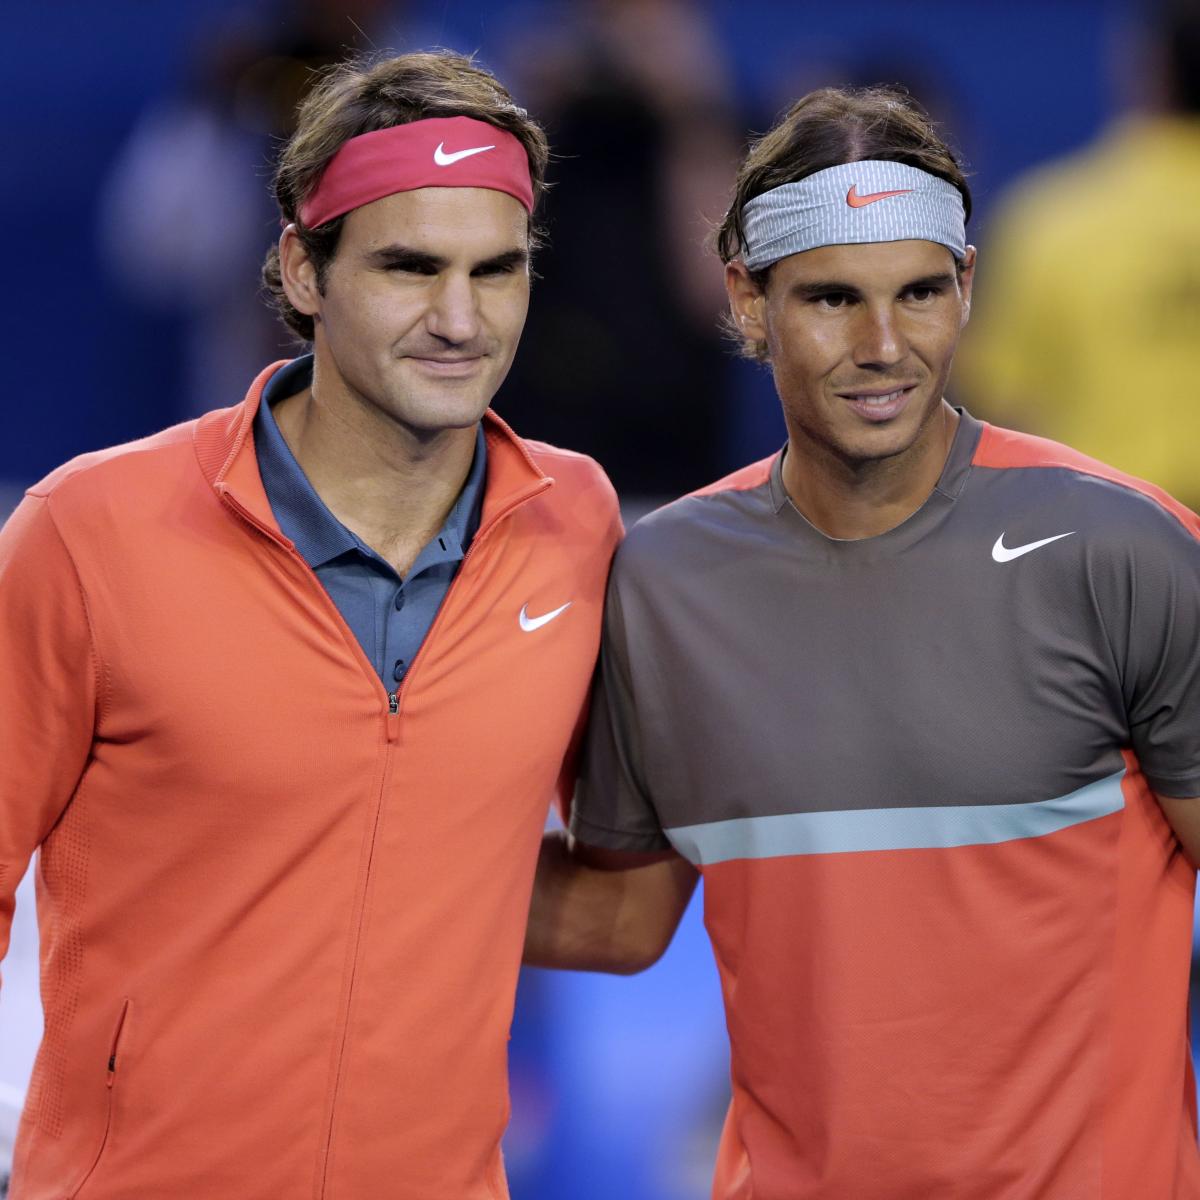 Who Will End Up with the Most Career Titles: Federer, Nadal or Djokovic ...